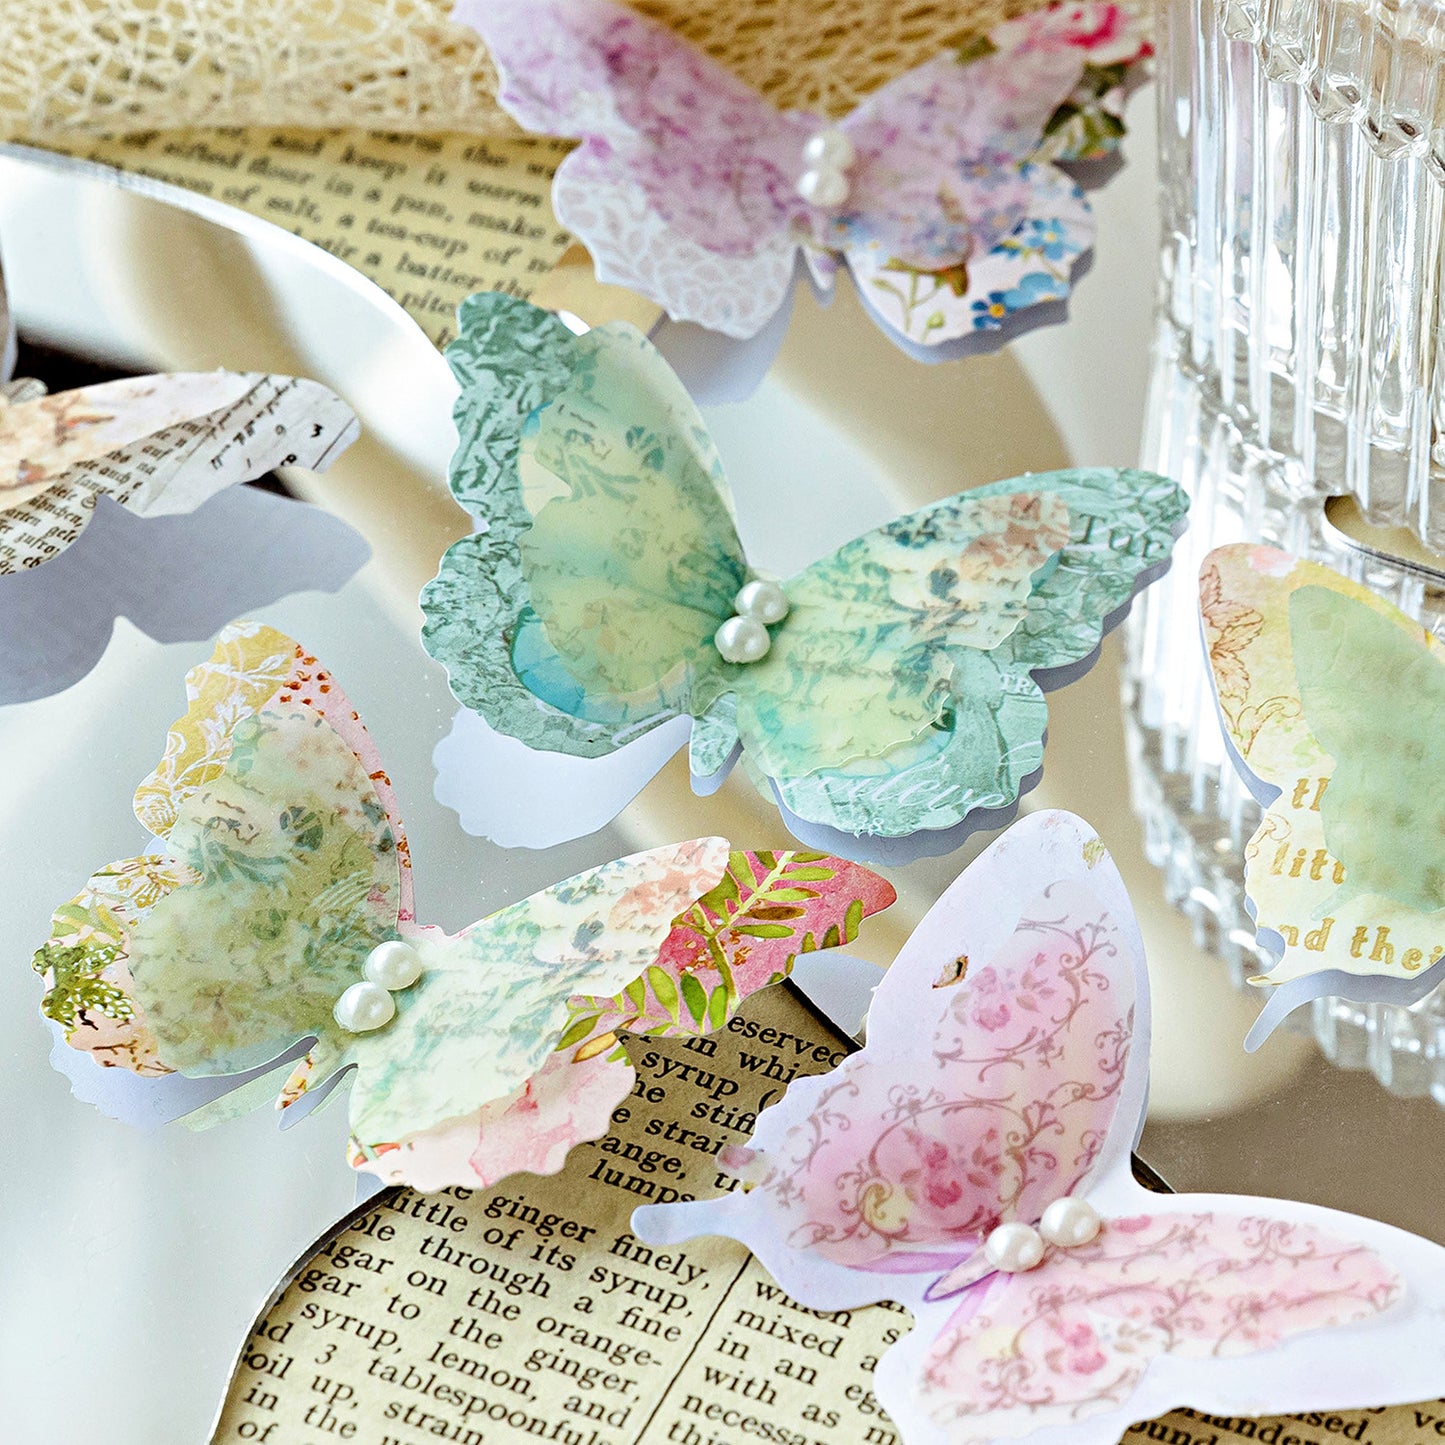 50 Pcs Vintage Butterfly Stickers HDDSY